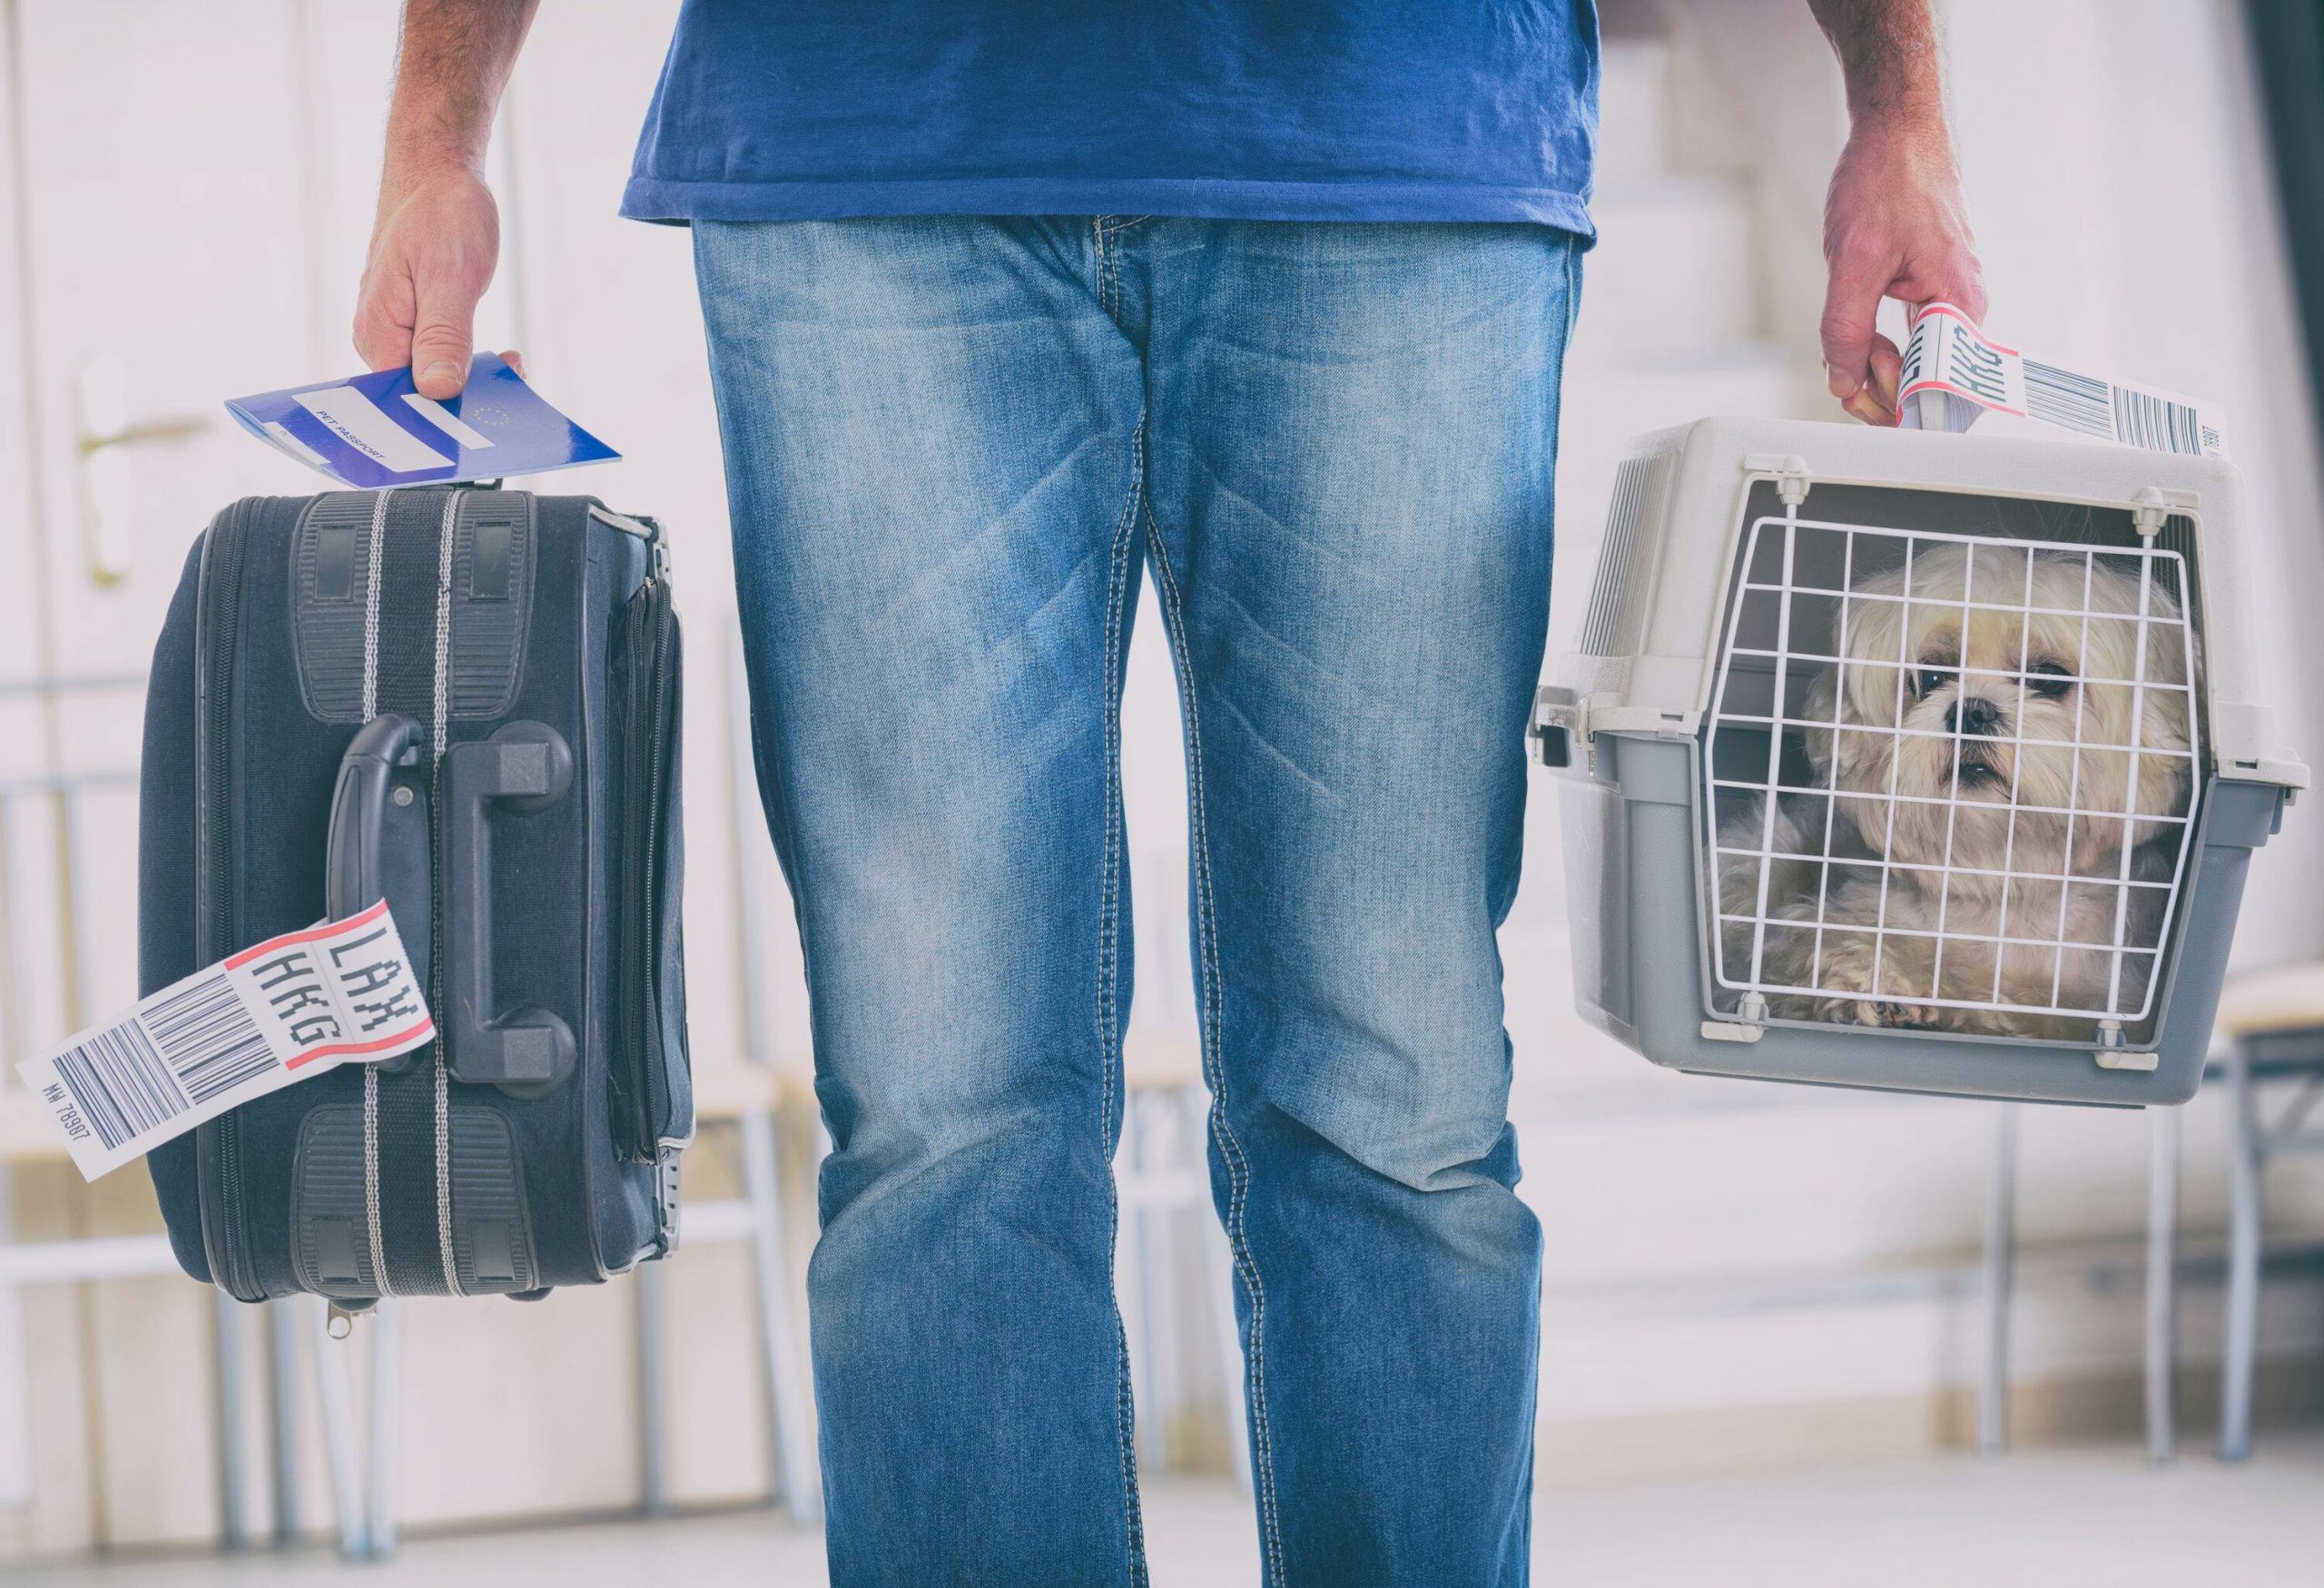 A man carrying a suitcase in one hand and a pet carrier containing a white dog in the other.